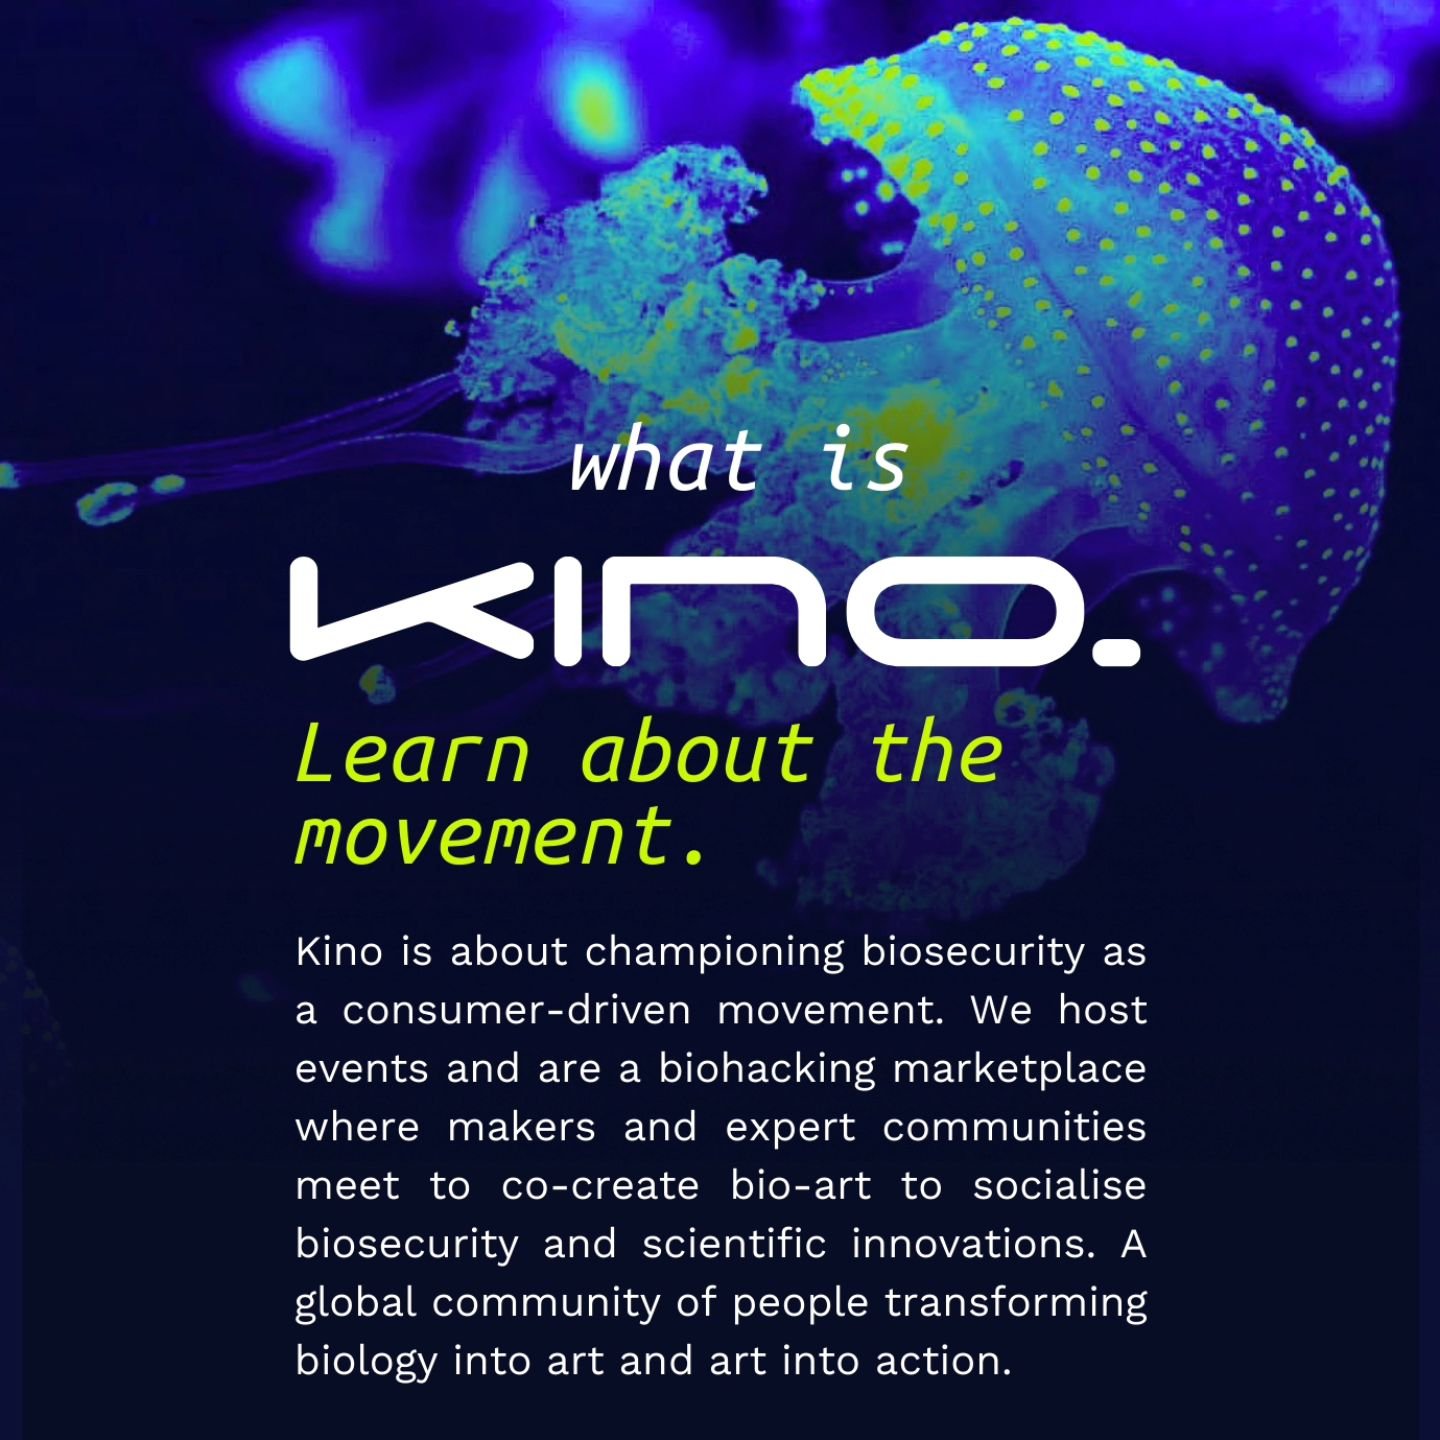 🌱💡 Kino is all about championing biosecurity as a consumer-driven movement! Join us as we host events and serve as a biohacking marketplace, bridging makers and expert communities to co-create bio-art and socialize biosecurity and scientific innova